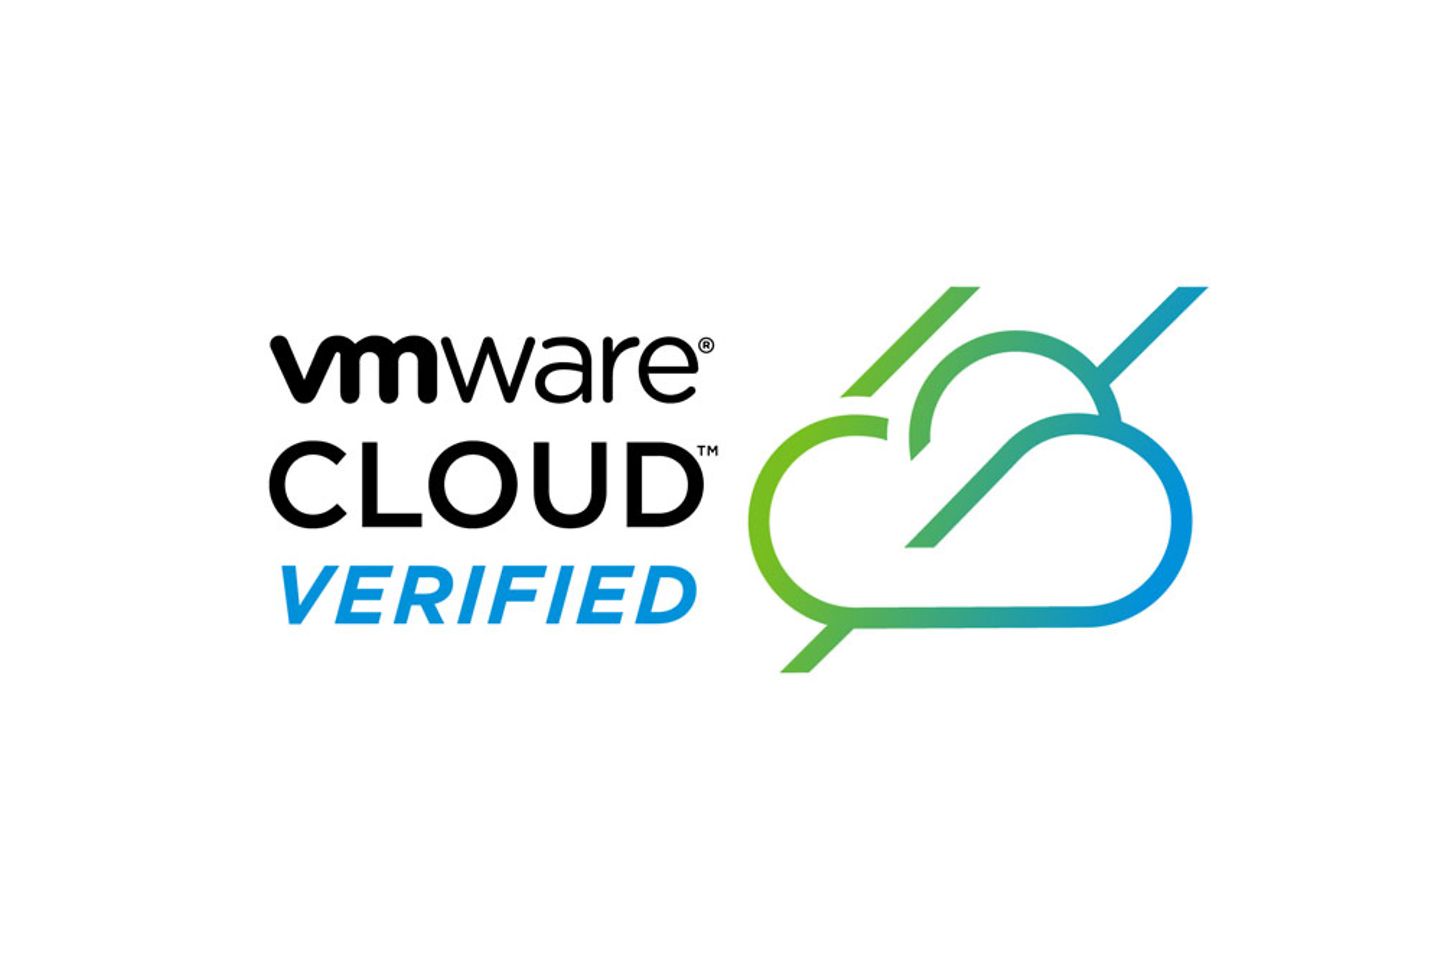 VMware logo together with a symbol of a cloud